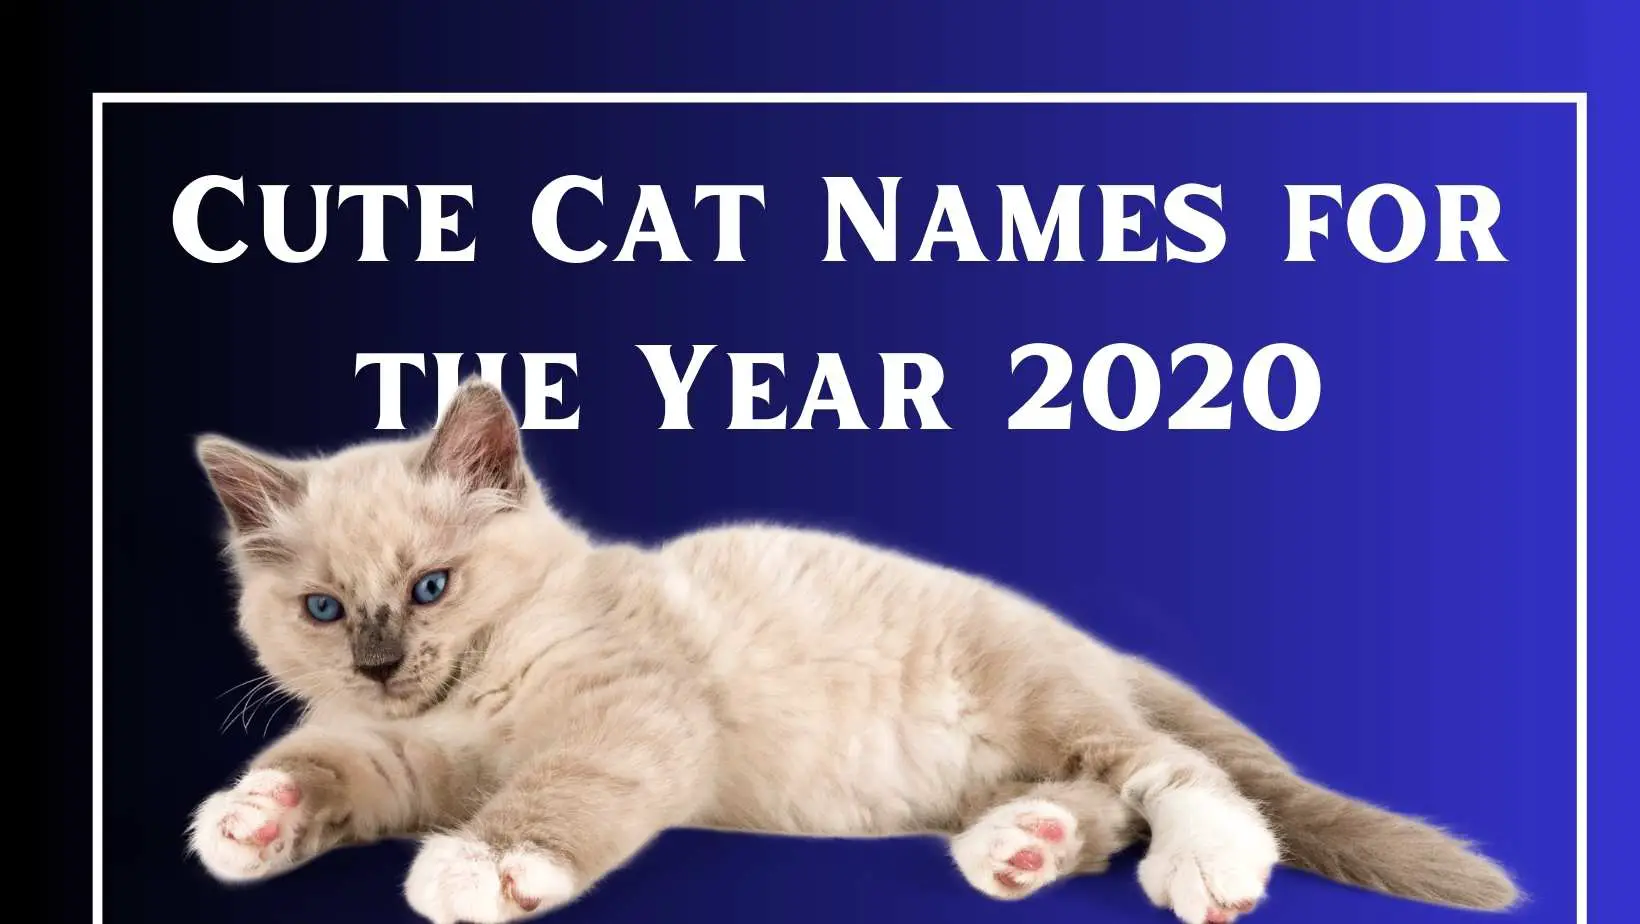 Cute Cat Names for the Year 2020